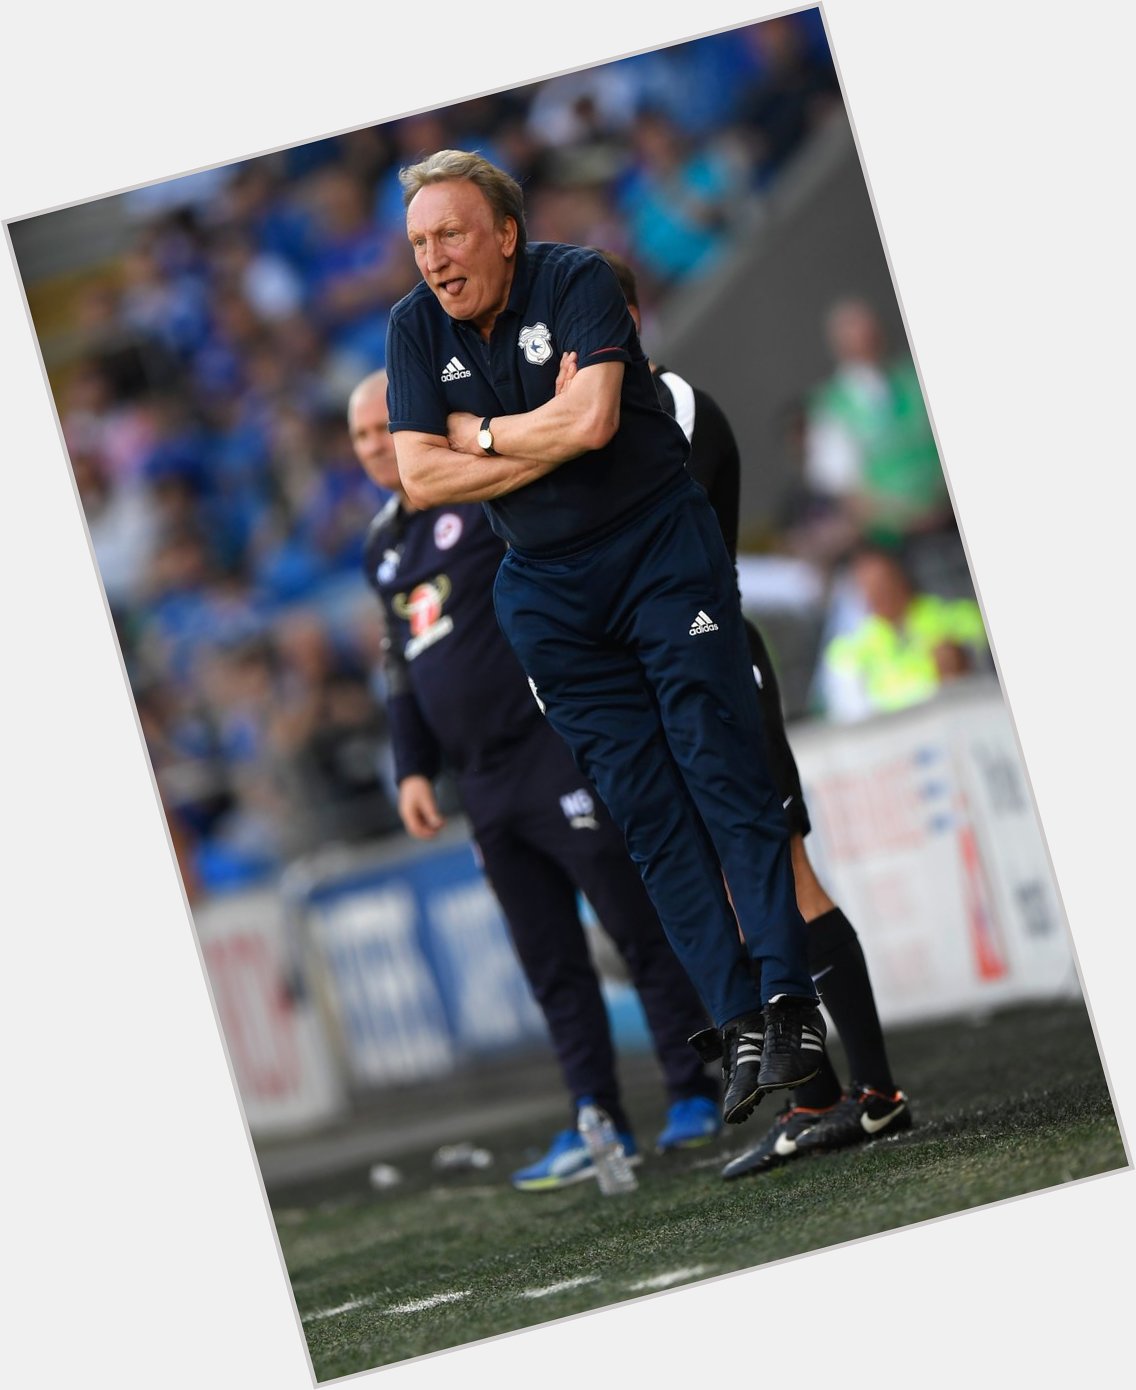 A happy 72nd birthday to Neil Warnock. An icon of the game, whichever way you look at it. 